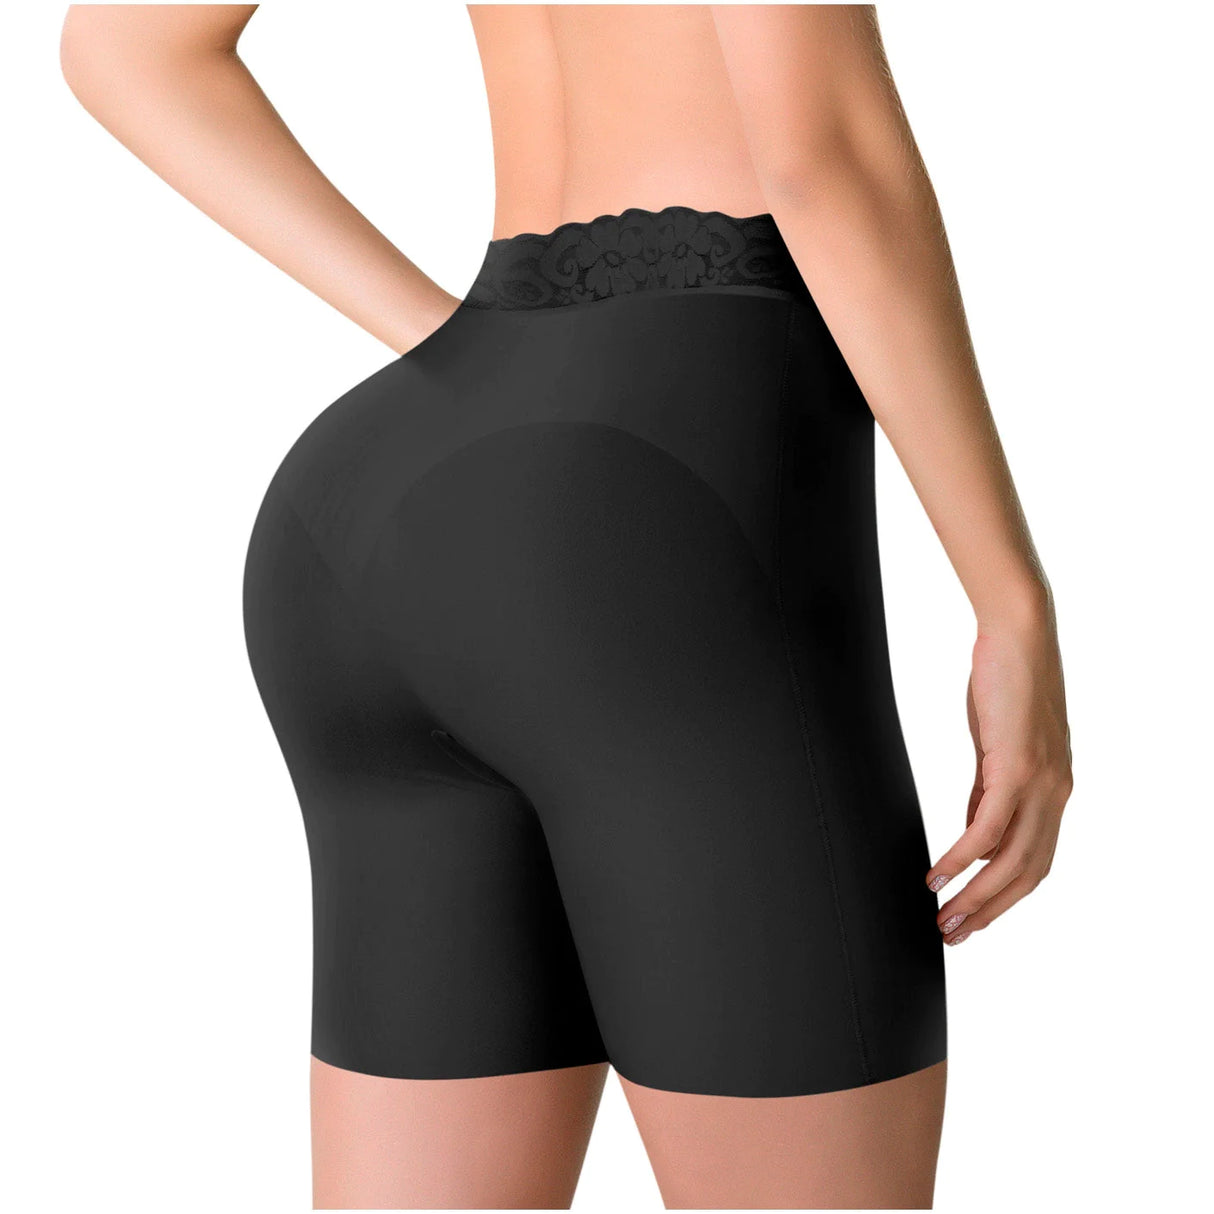 Colombian Fajas Butt Lifter Pants With Seven Split Crotch And Leg